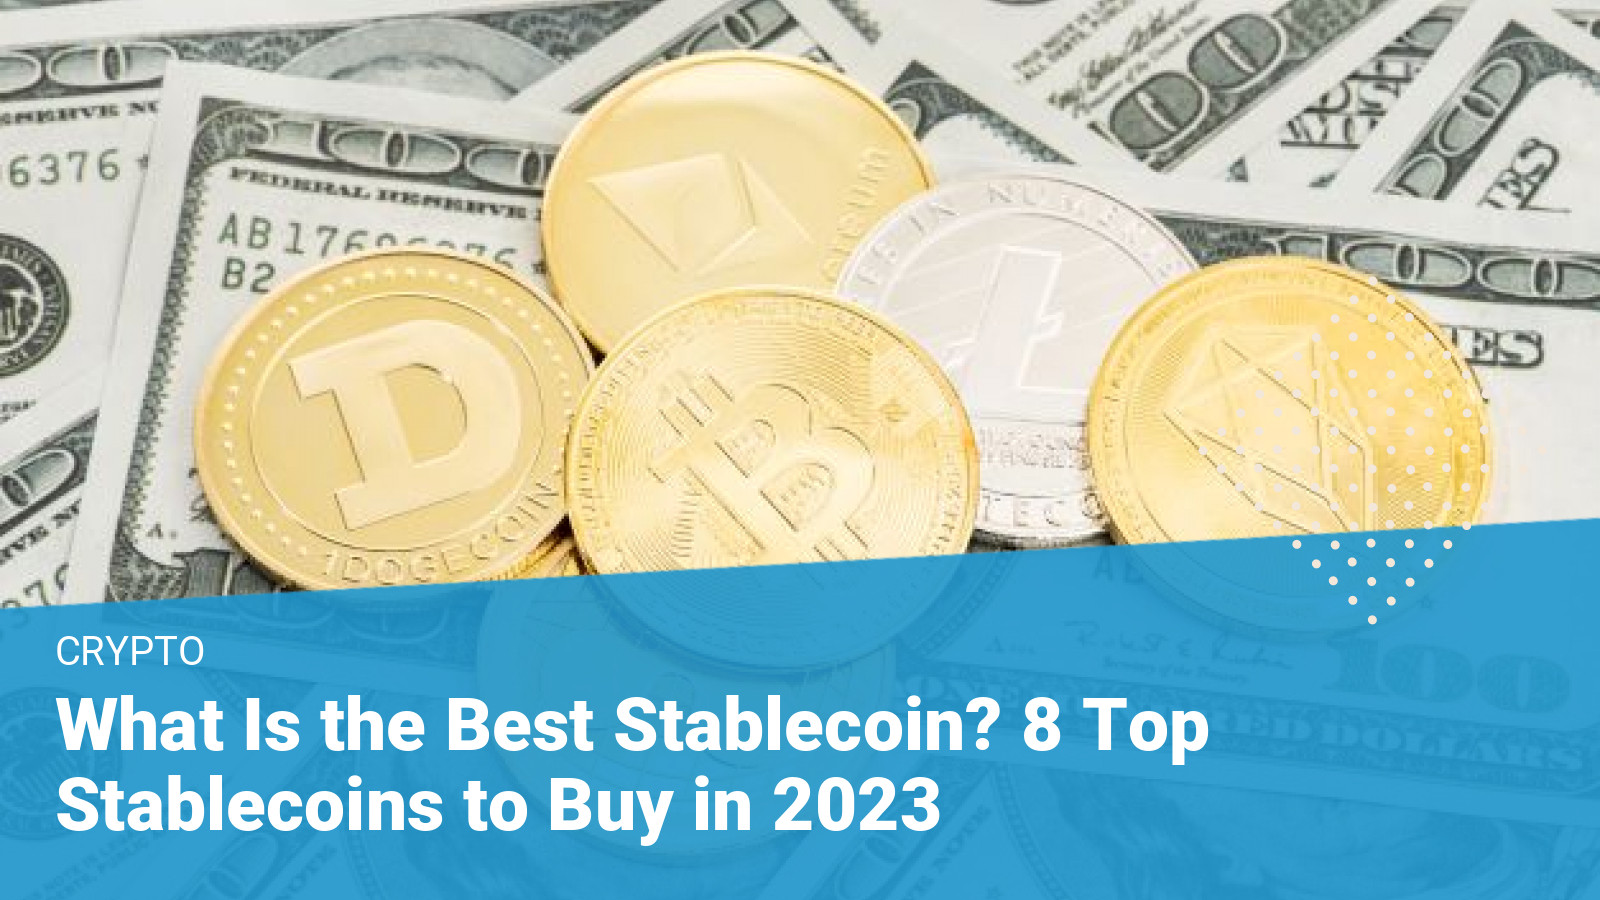 How to Choose the Best Stablecoin to Invest in